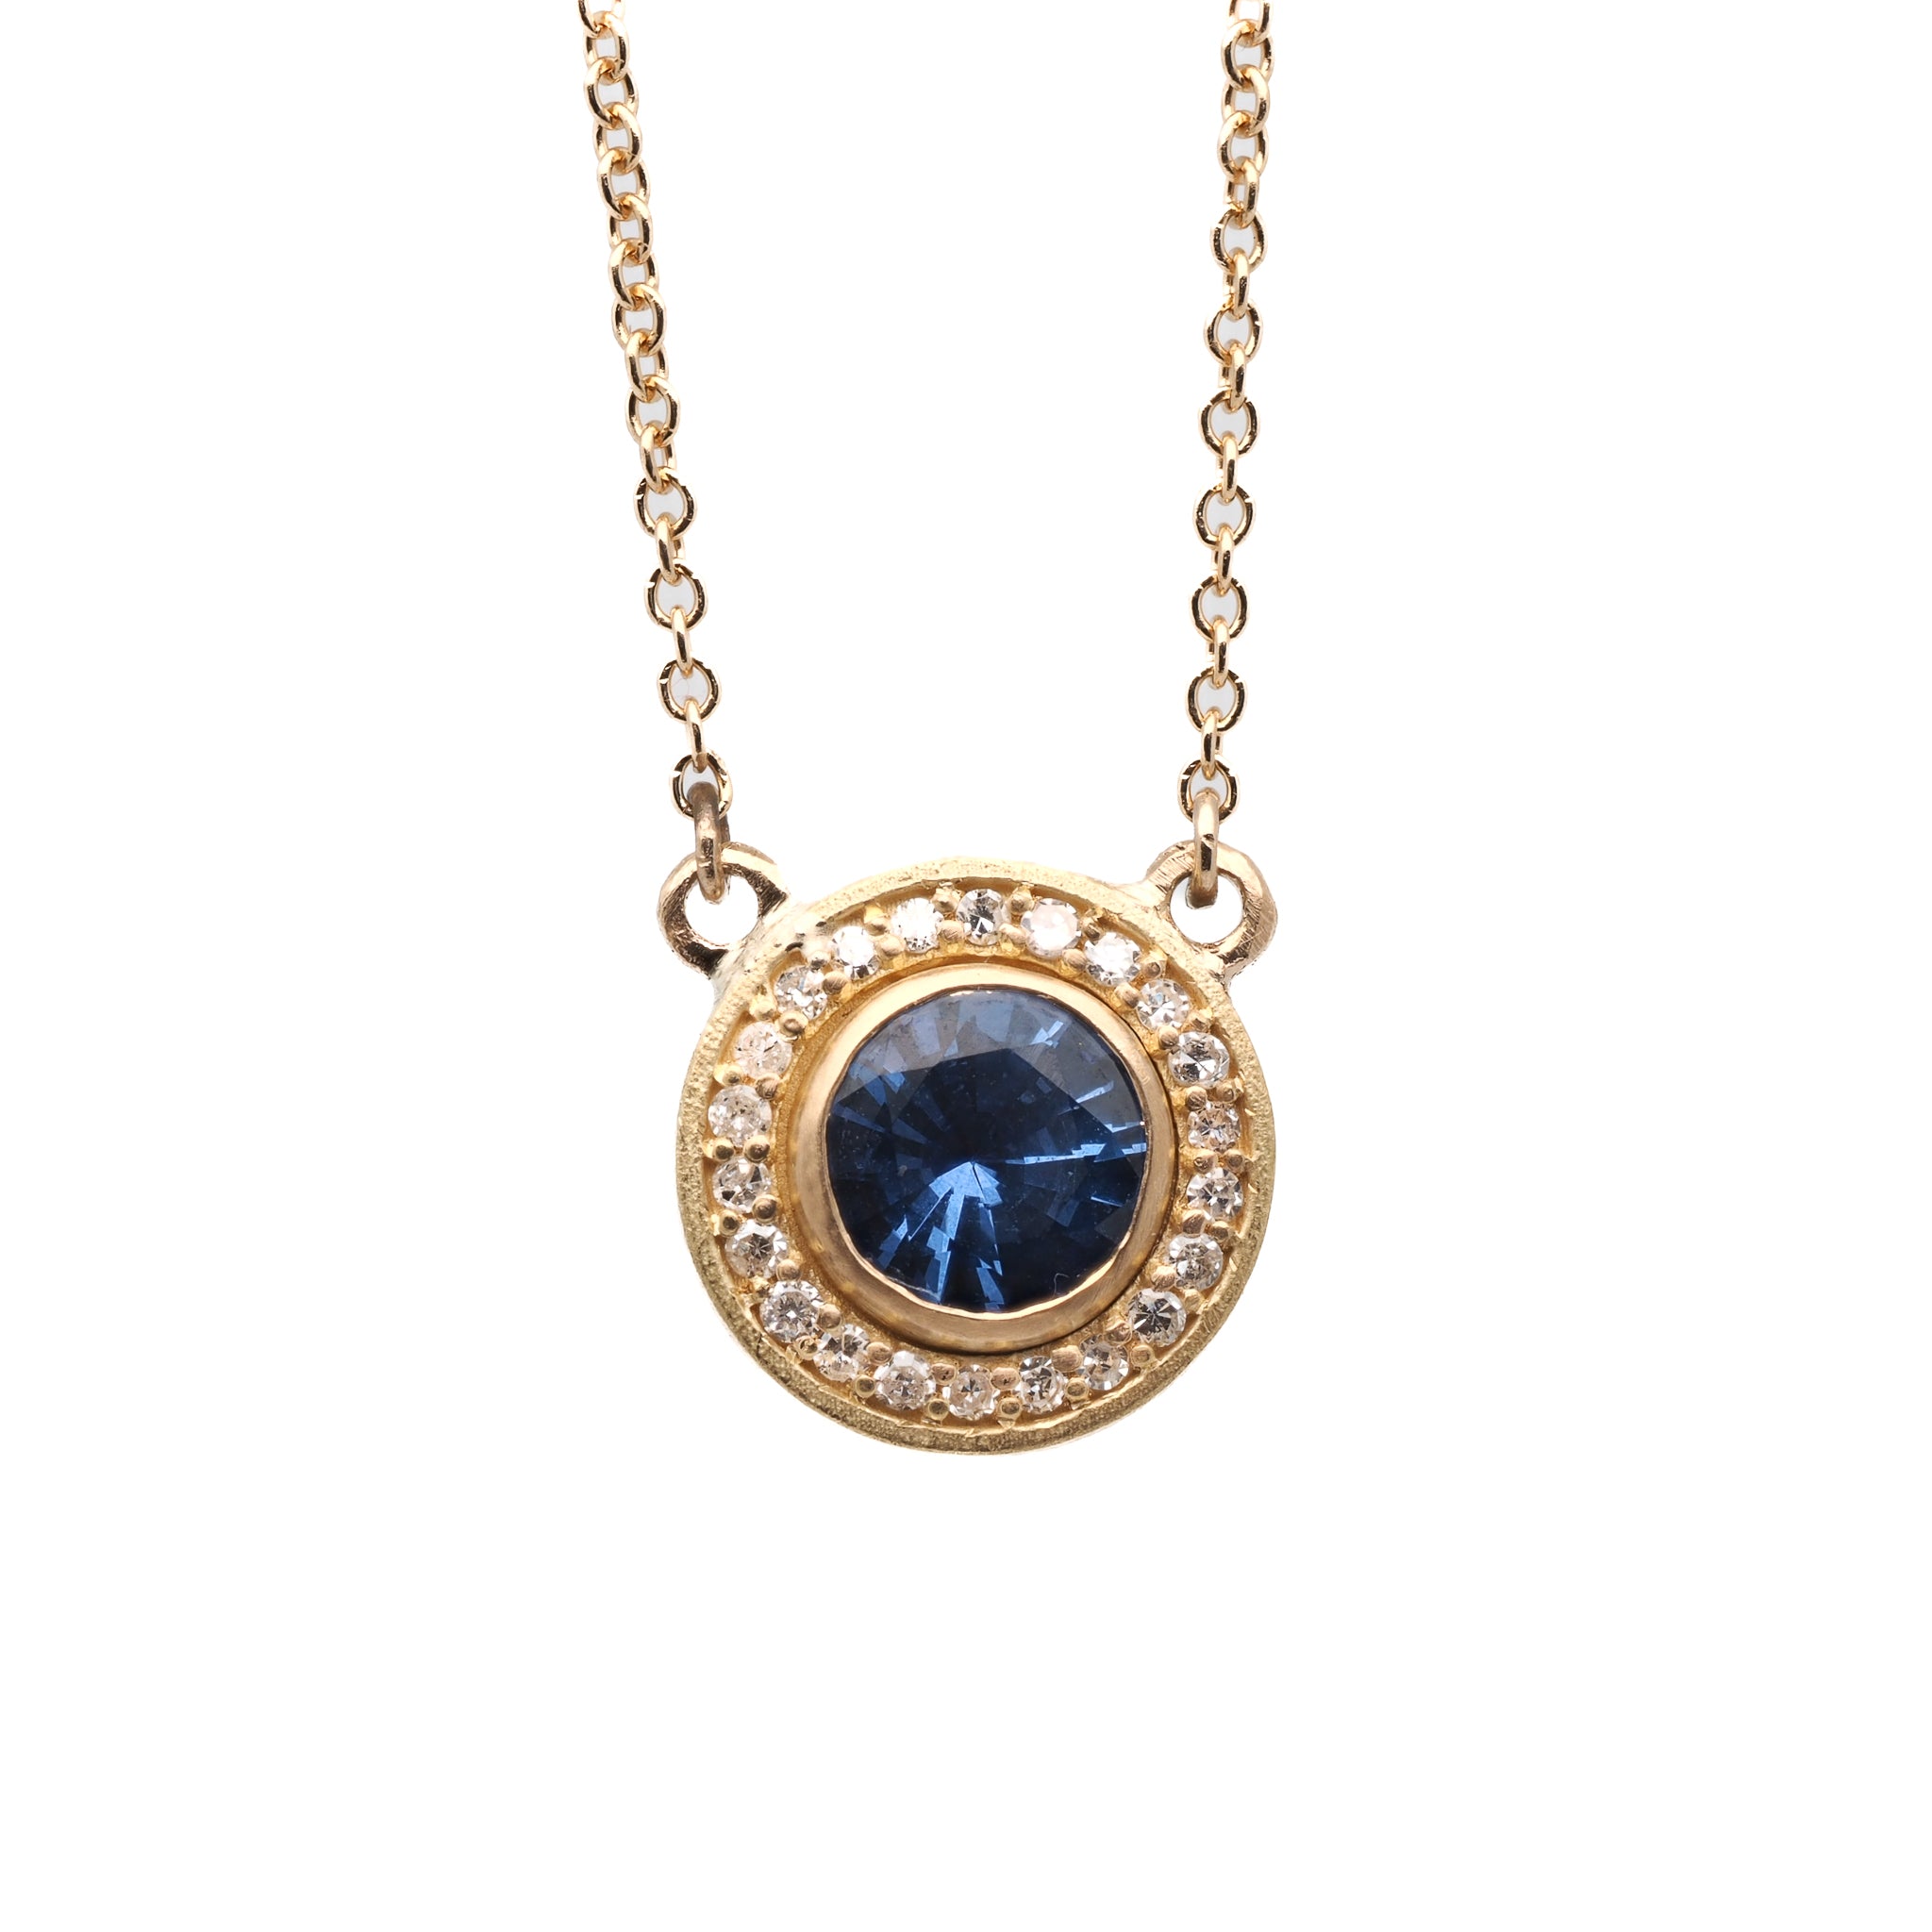 Close-up of the Elegant Sapphire Necklace showcasing the exquisite 18k yellow gold pendant adorned with a mesmerizing 1ct sapphire and sparkling 0.30ct diamonds.